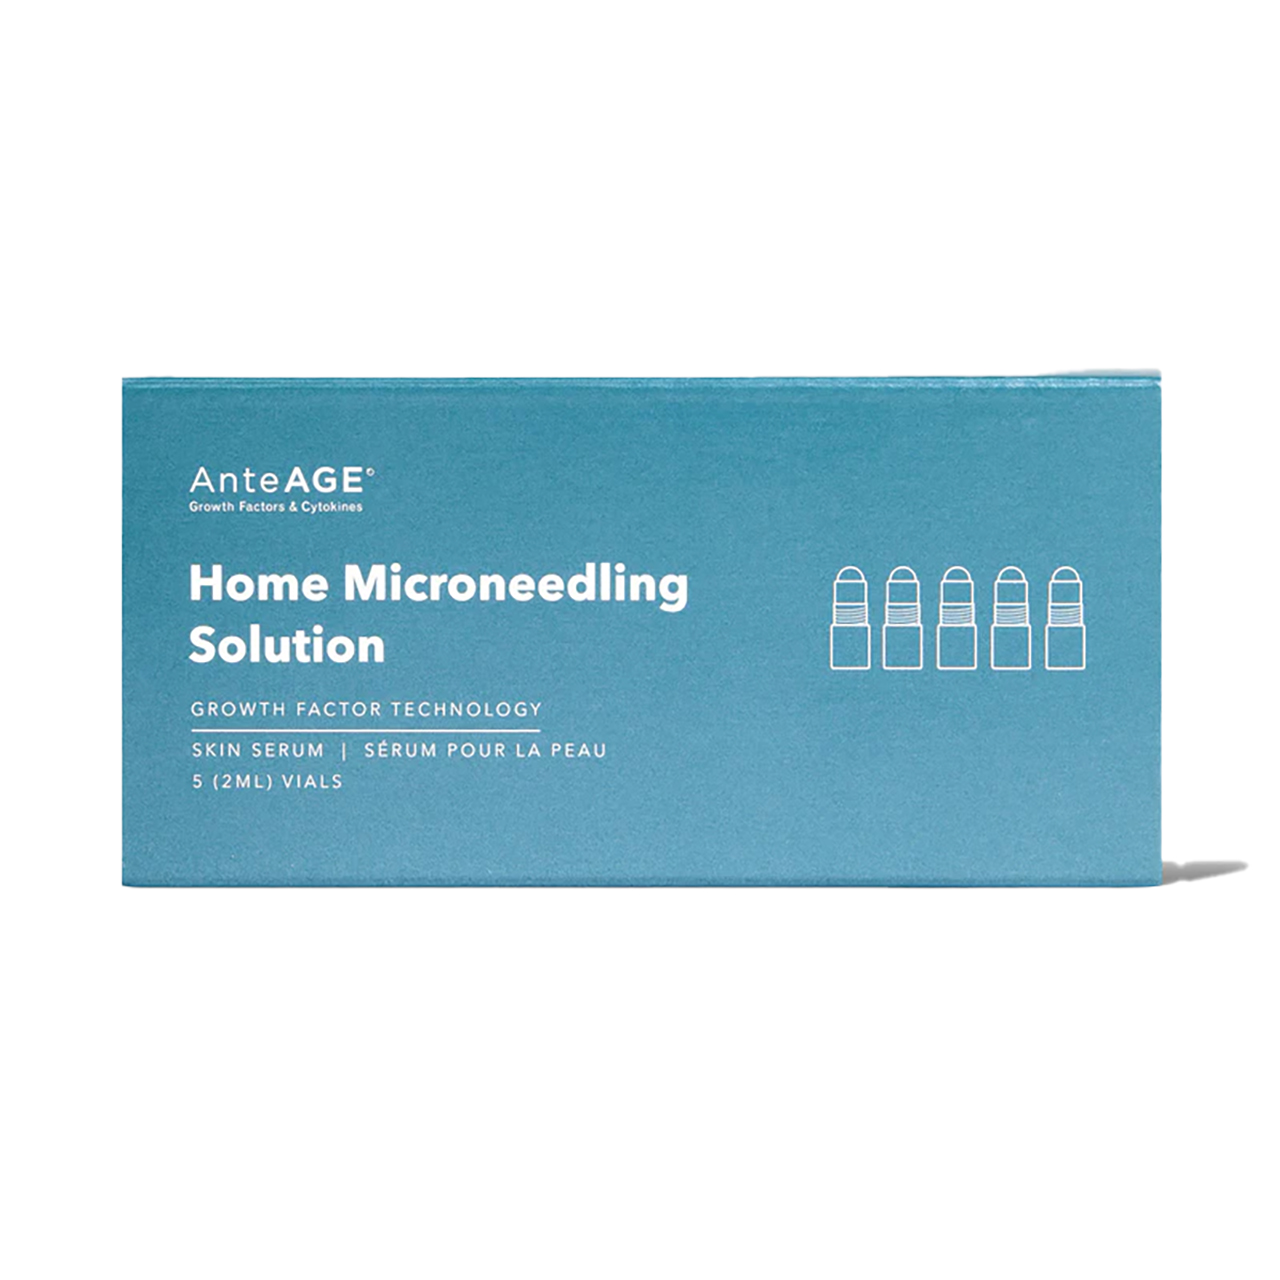 AnteAGE Home Microneedling Solution - 5 x 2 ml (008000) Questions & Answers